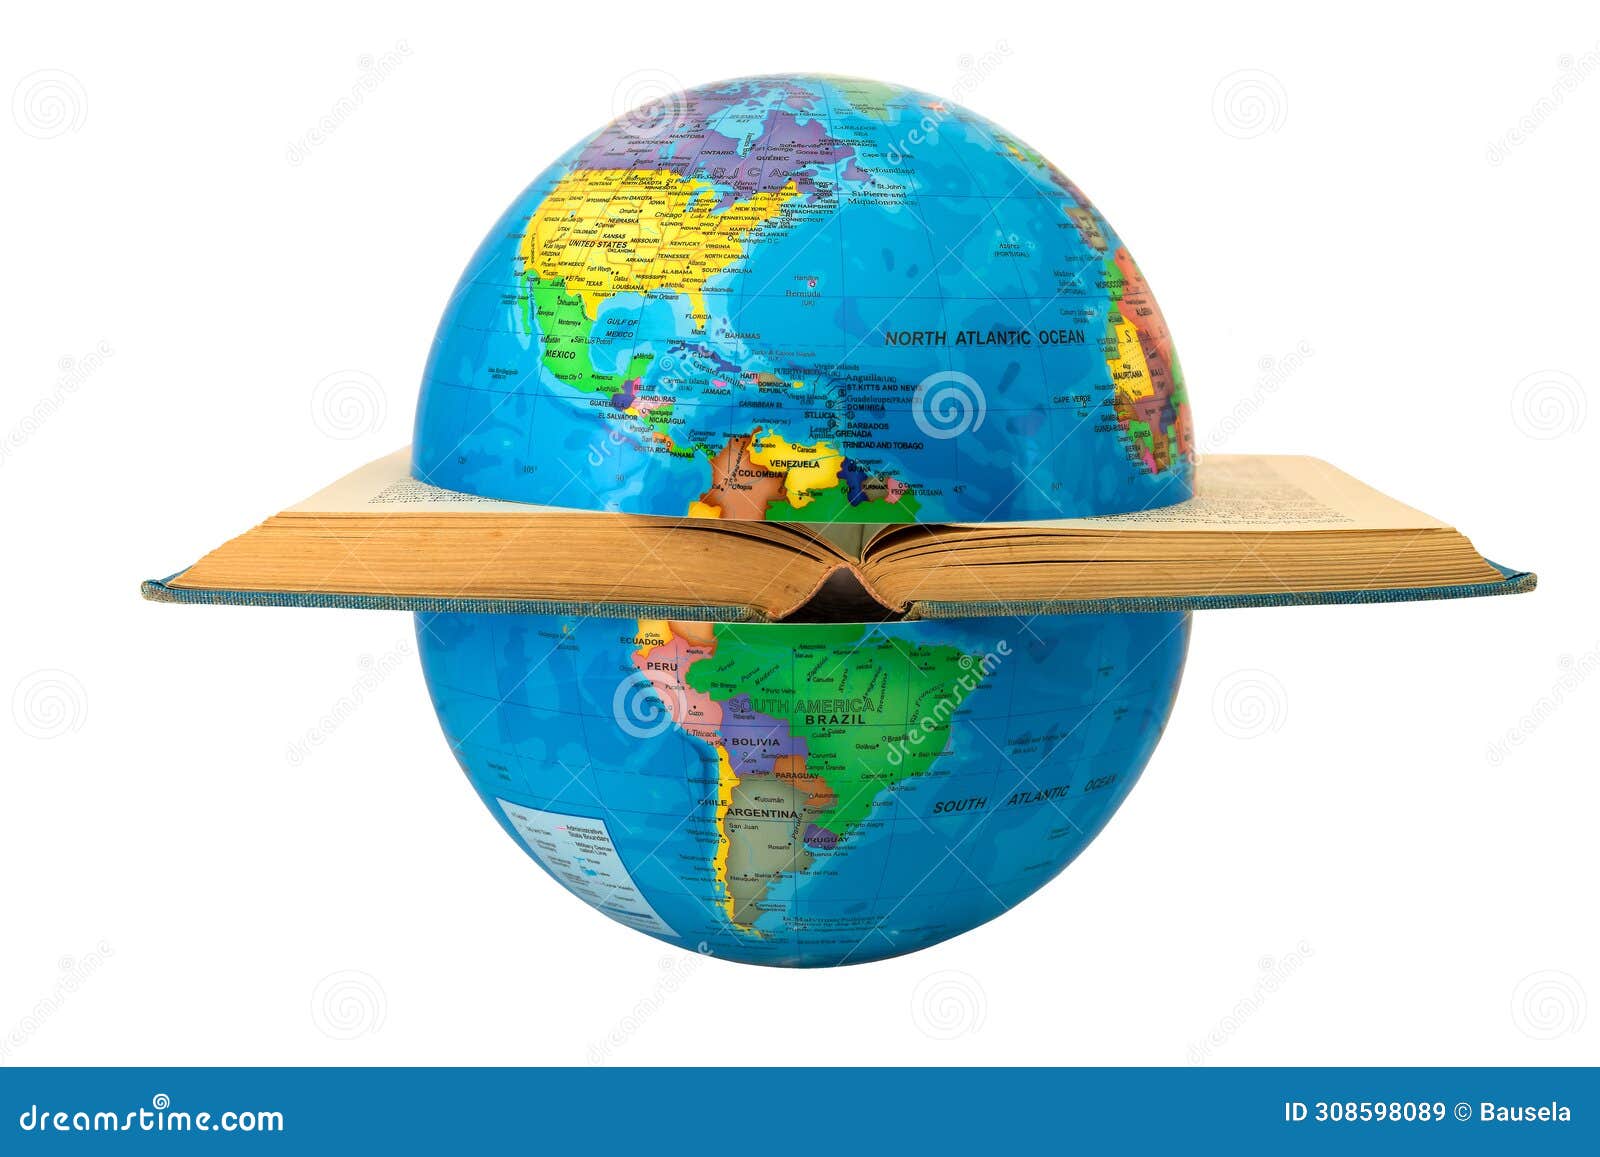 earth globe divided by a book showing america: concept of division and war. the open book izes the cultures that divide the